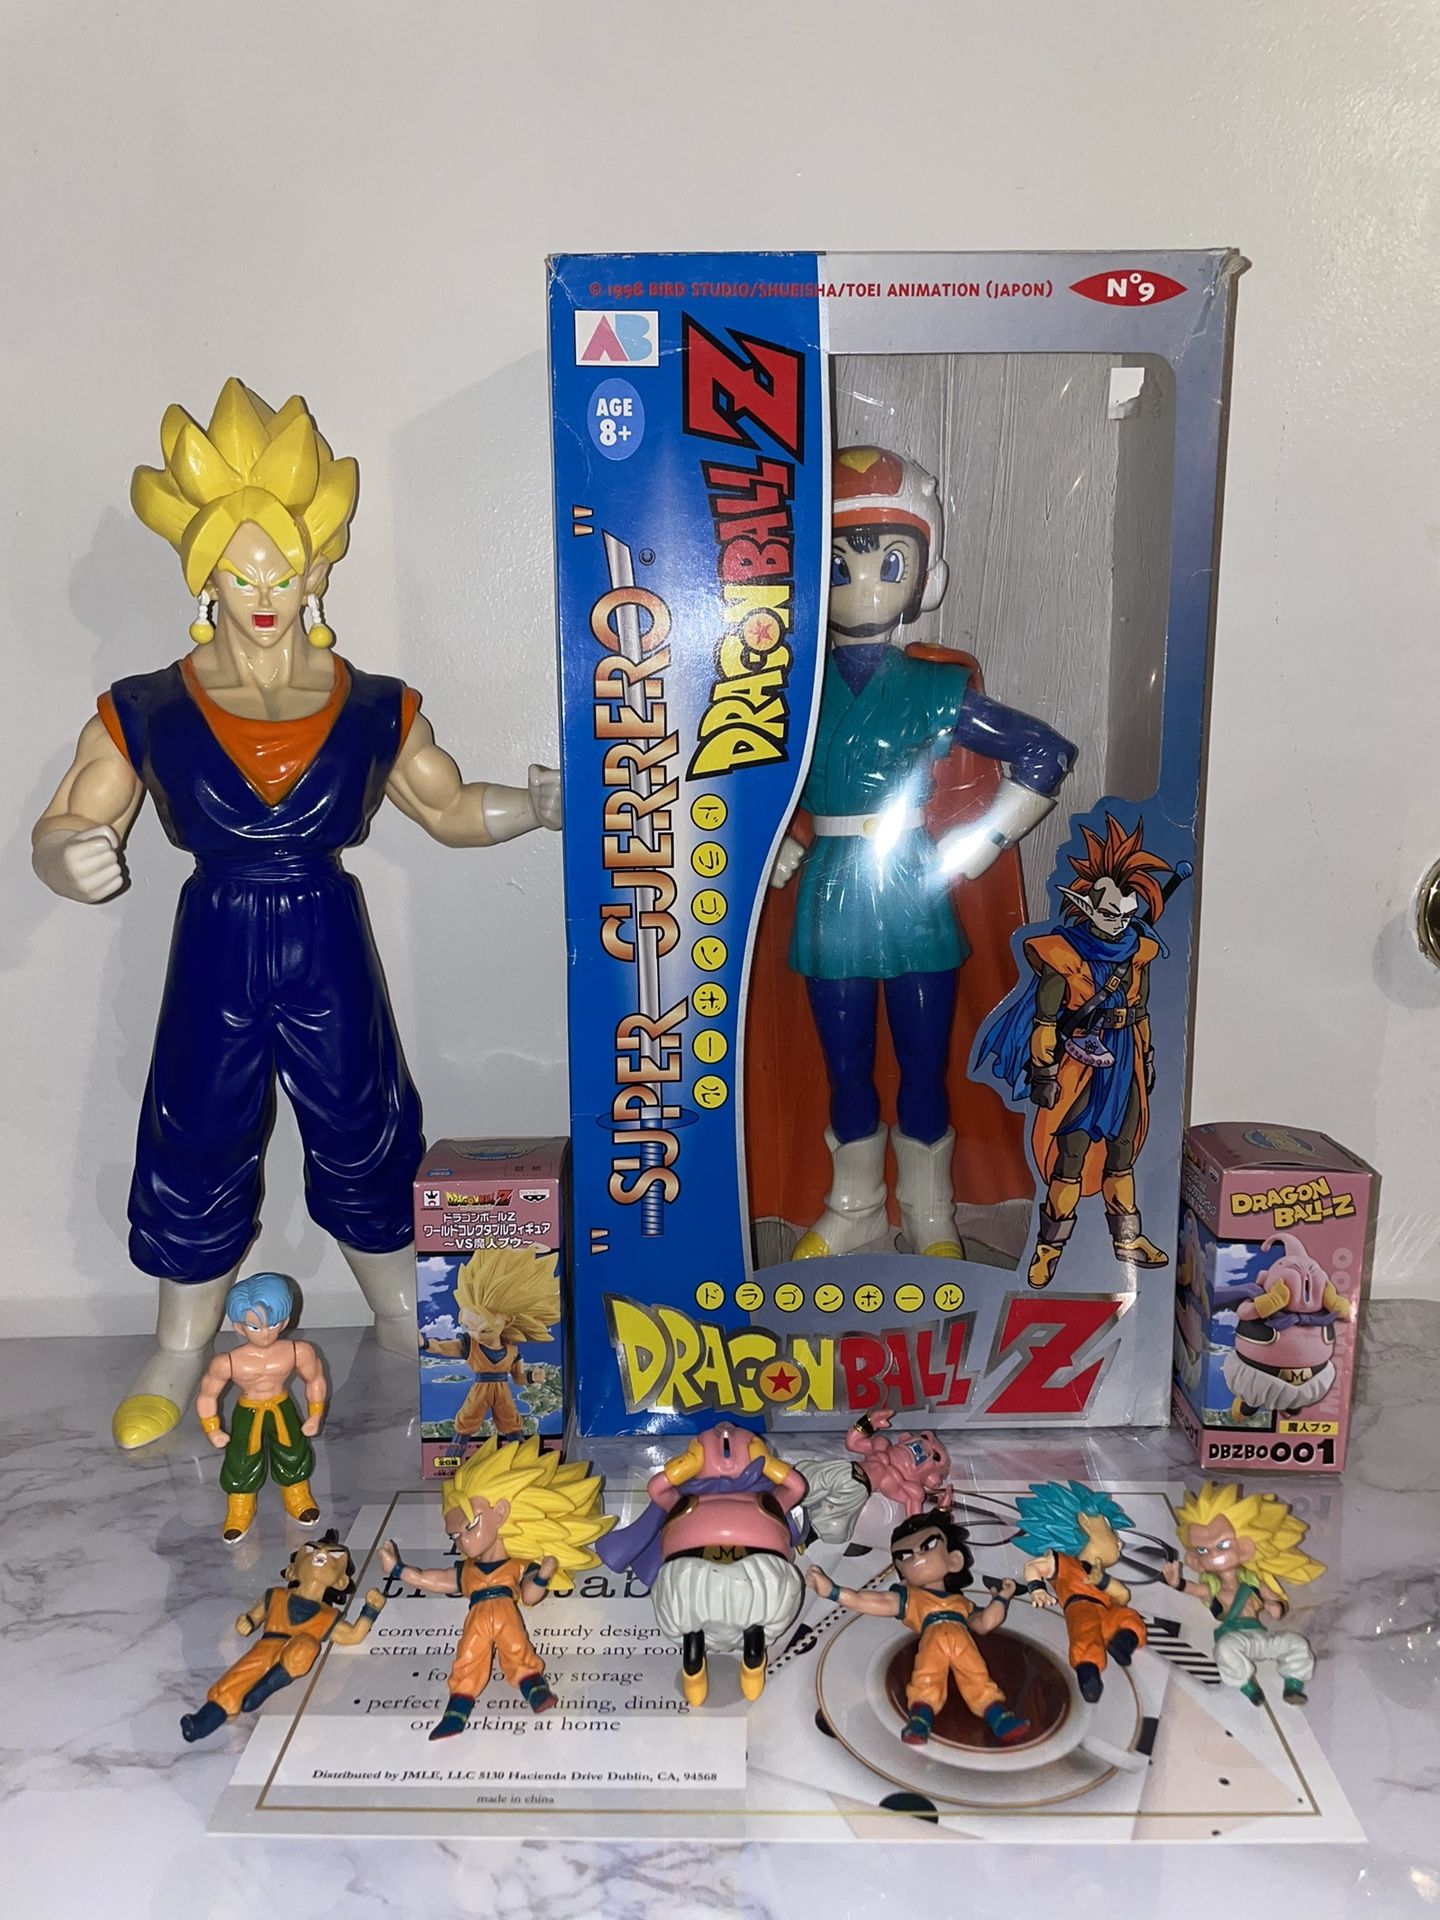 VINTAGE DRAGON BALL Z ACTION FIGURE AND FIGURINE SET FOR SALE! 